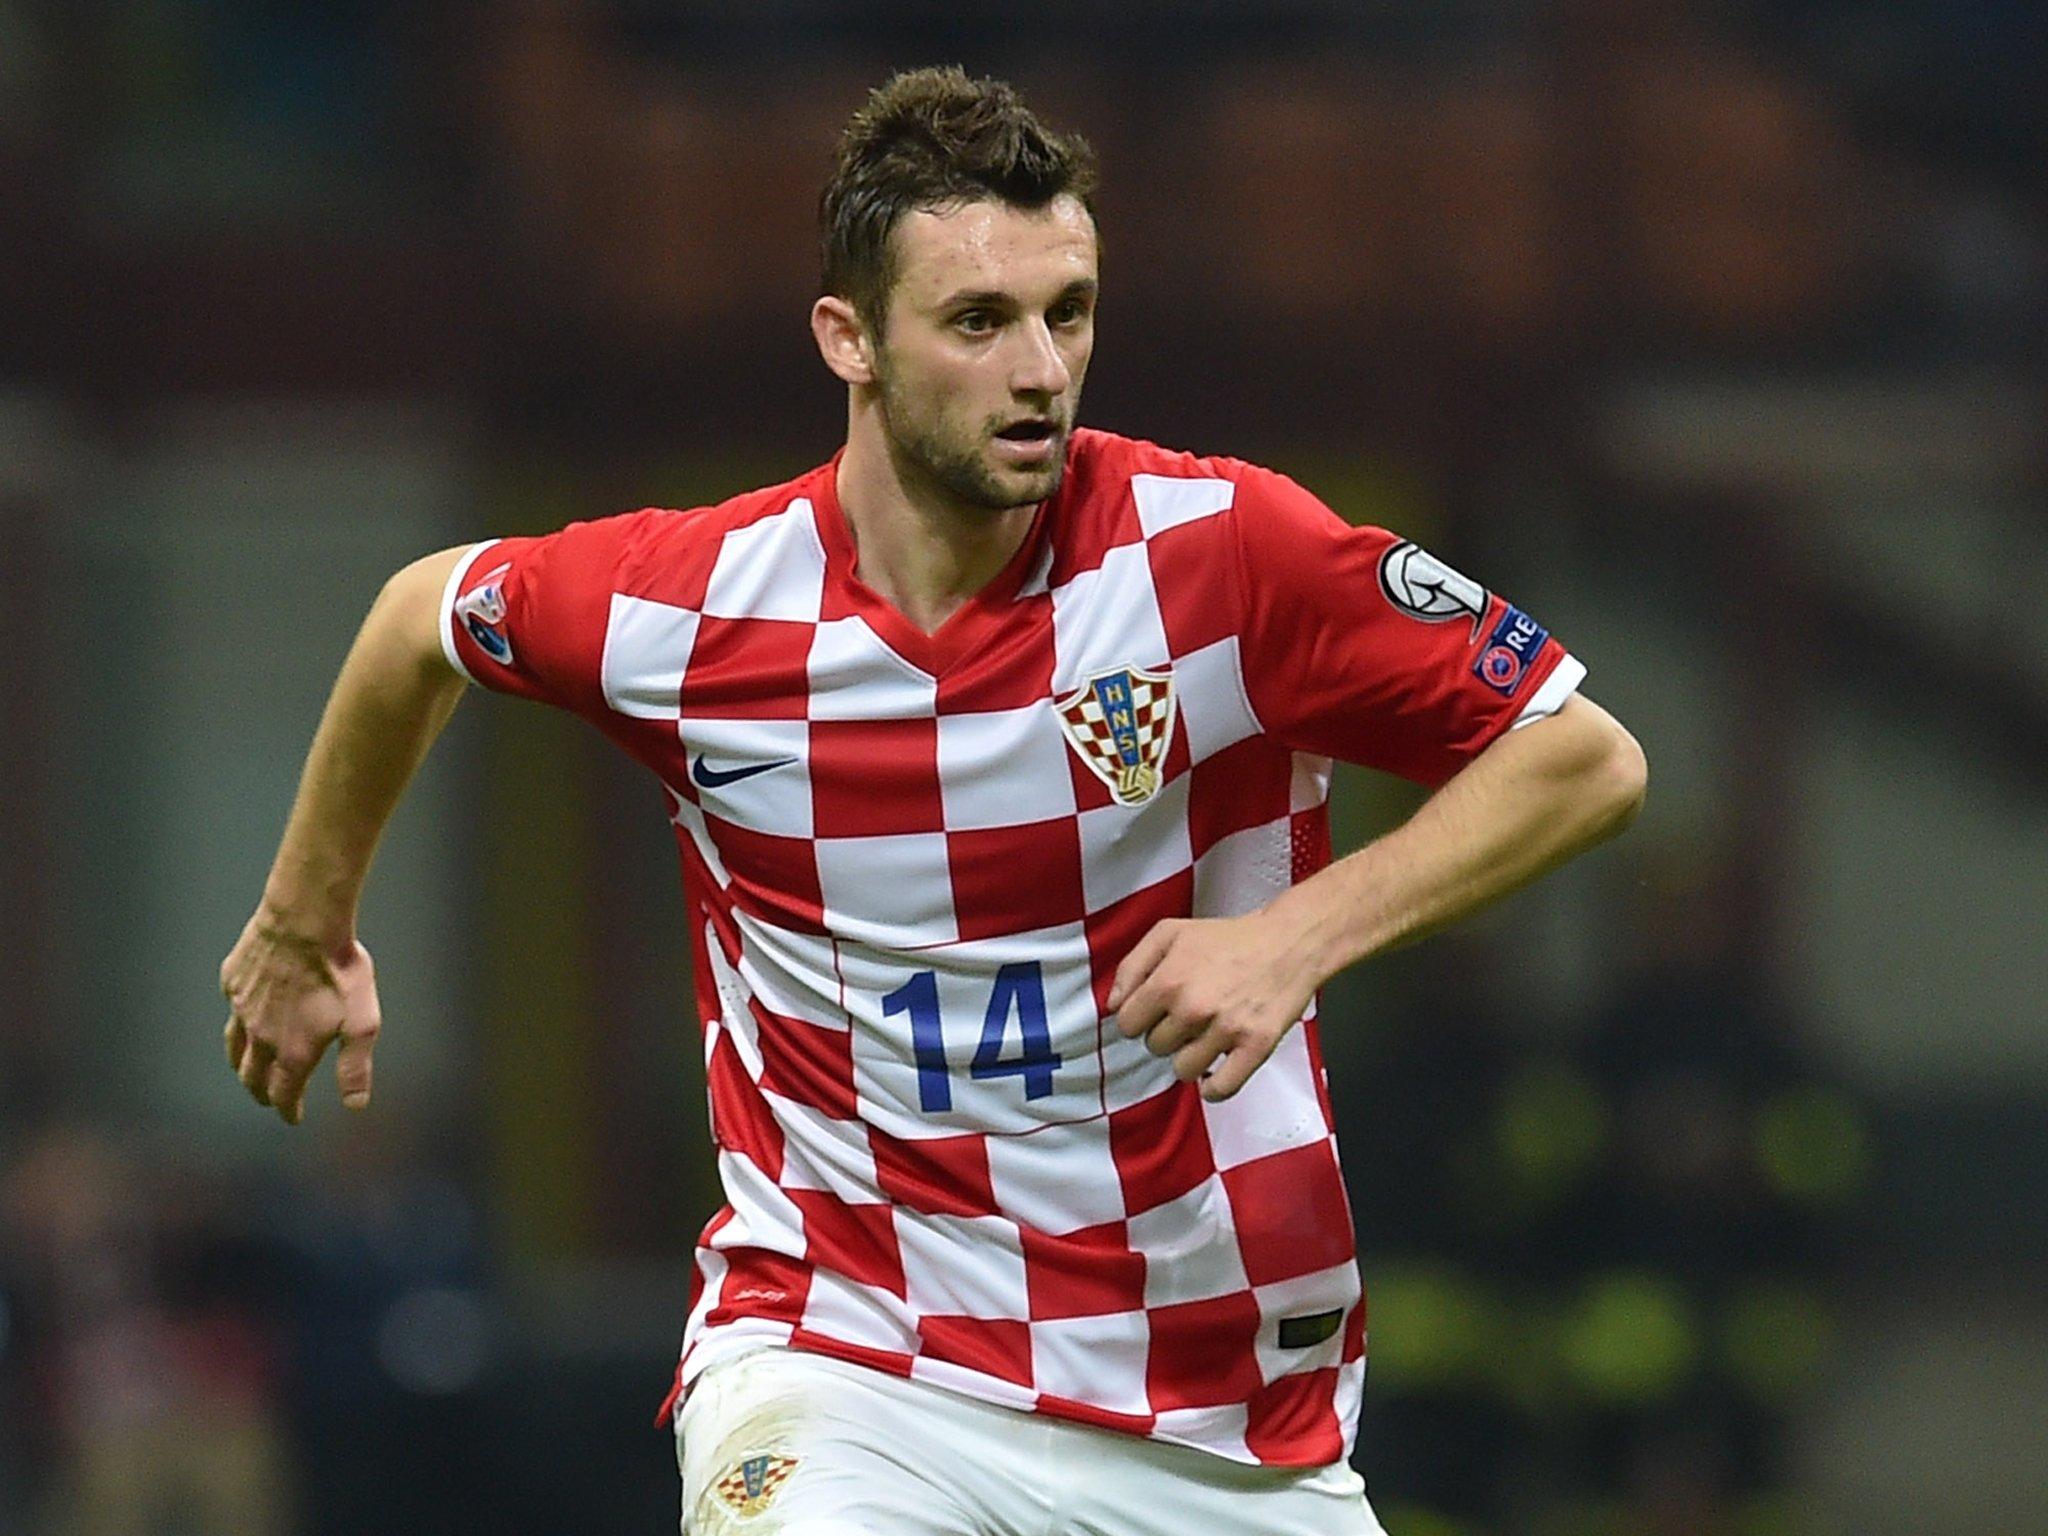 Arsenal transfer news and rumours: £8m bid for Marcelo Brozovic